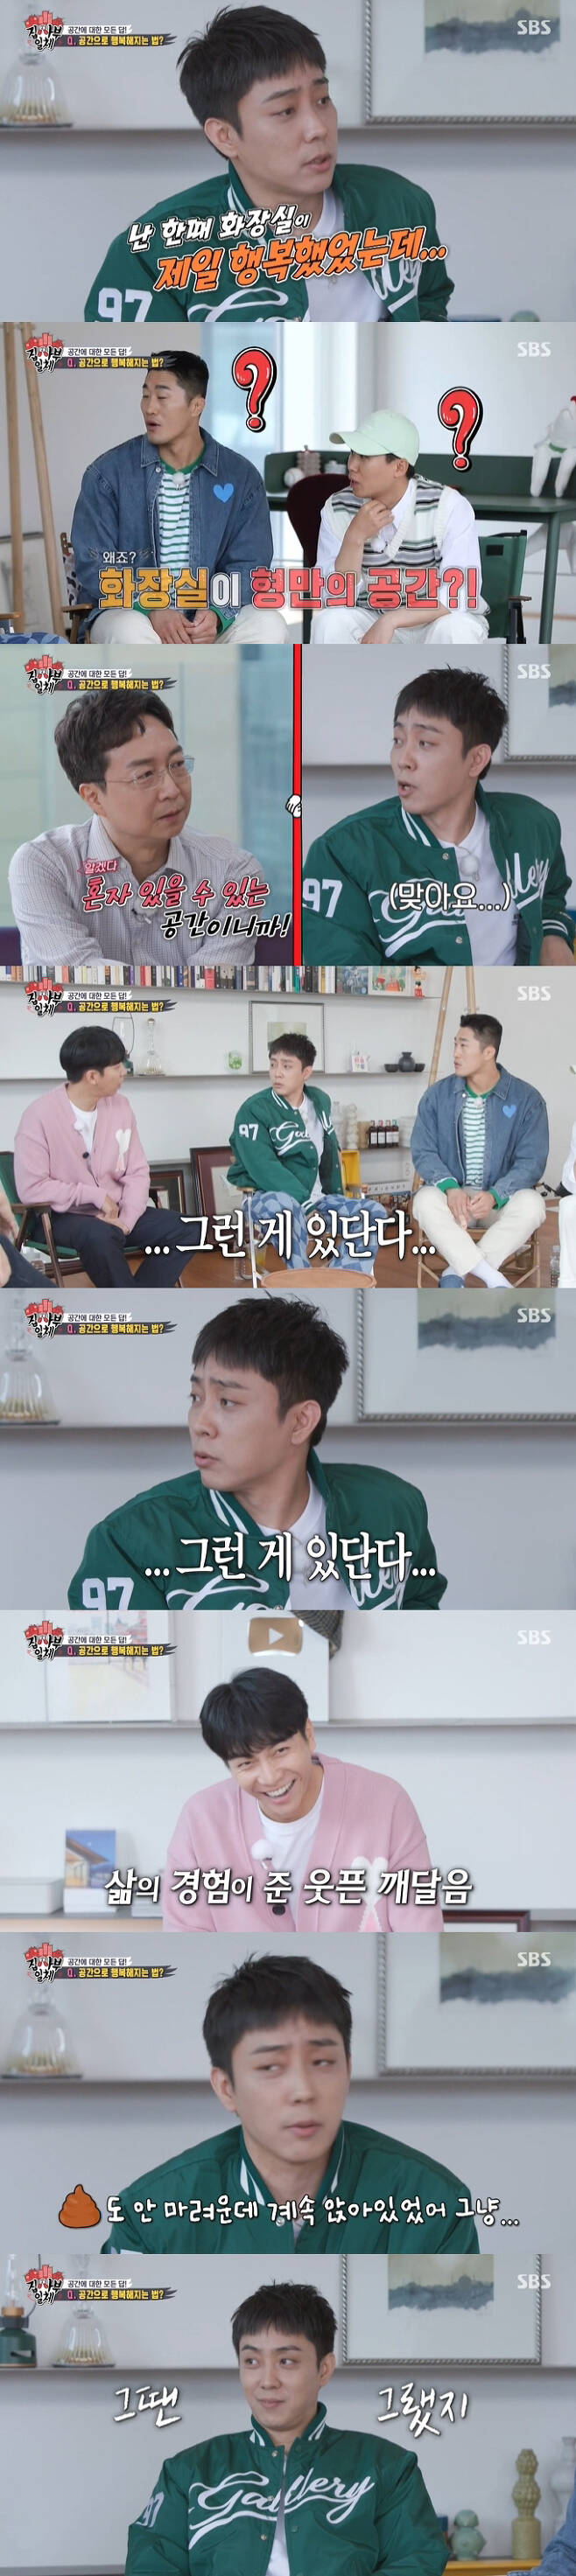 I once had the happiest toilet space.Eun Ji-won caught the eye by saying this on SBS All The Butlers broadcast on the 24th.On this day, architect Yu hun-jun appeared as master and revealed his own architectural theory to All The Butlers members.Professor Yoo said, I live in an apartment. I live in a apartment, so I can not touch the house interiors.Im not the only one living alone, I have to consider a lot of things, including the family situation, two places where I can do my own thing in my house, a two-car closet and a veranda.I think about whether or not I can plant my rules in a place where I can say that it is my space. You need to make a lot of such space to be happy. Eun Ji-won said, I once had the happiest toilet. The bathroom was a surprisingly happy space. I sat on the toilet without toilet.No matter how beautiful the house interiors are, I liked the bathroom the best. When Lee Seung-gi did not understand, he said, Marry yourself. On the other hand, the members visited Kim Dong-Hyuns house on the day, and Kim Dong-Hyun confided in his worries about the house and asked the master to prescribe it.Yu hun-jun traveled around the house and distinguished good space and bad space without hesitation.Since then, Yu hun-jun has described Kim Dong-Hyuns house as a house lacking in communication, and has come up with his own limited solution for a well-communication house.